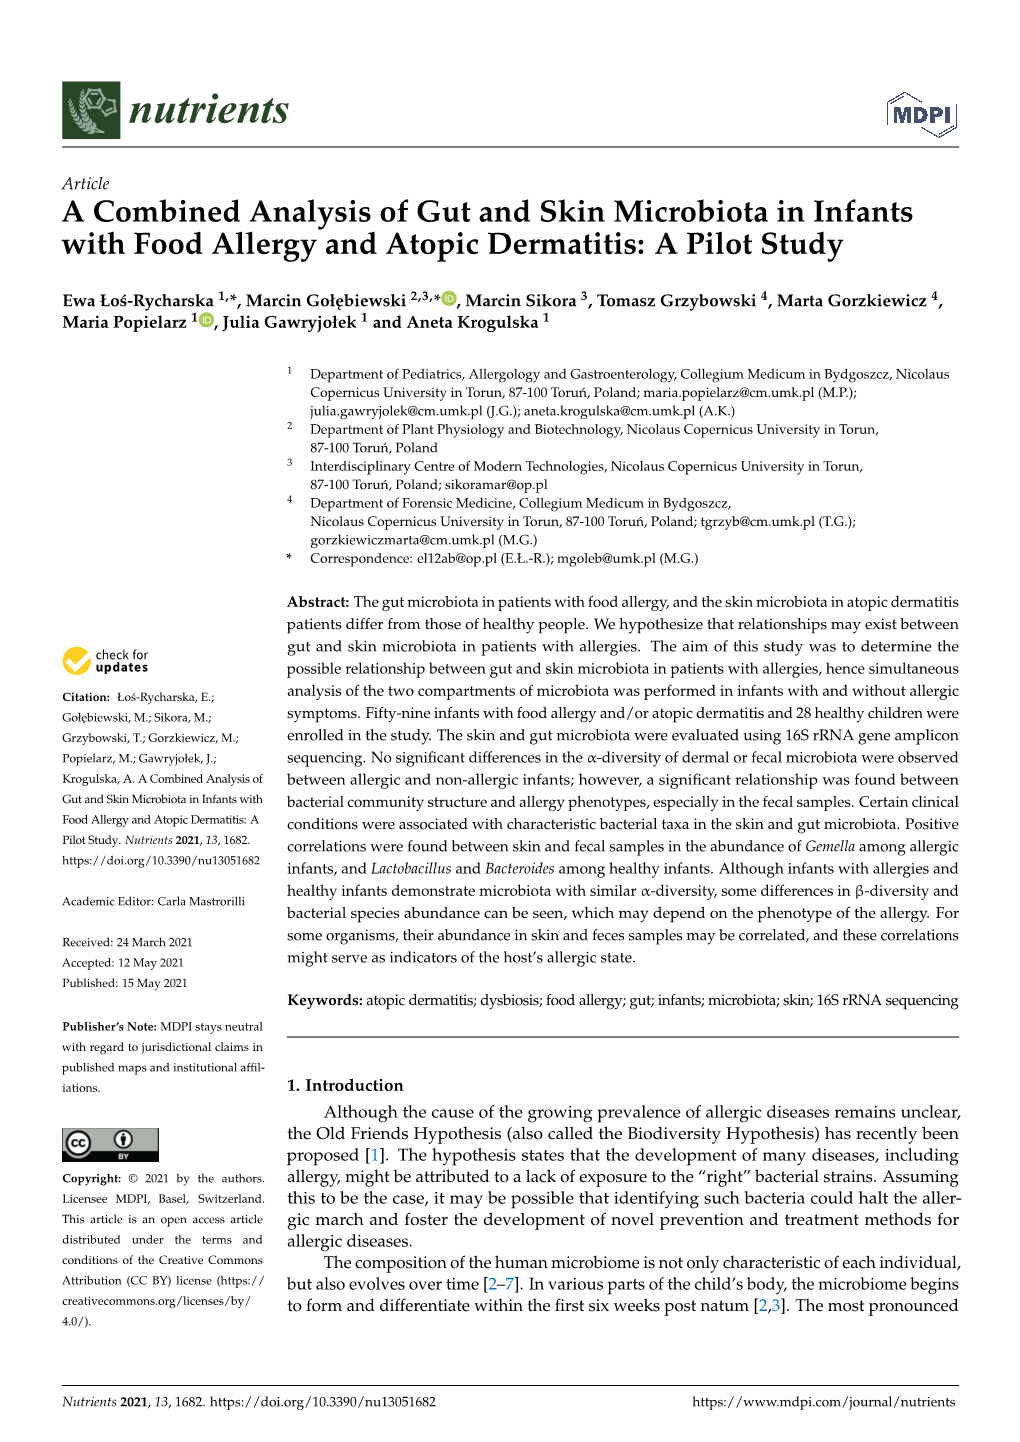 A Combined Analysis of Gut and Skin Microbiota in Infants with Food Allergy and Atopic Dermatitis: a Pilot Study